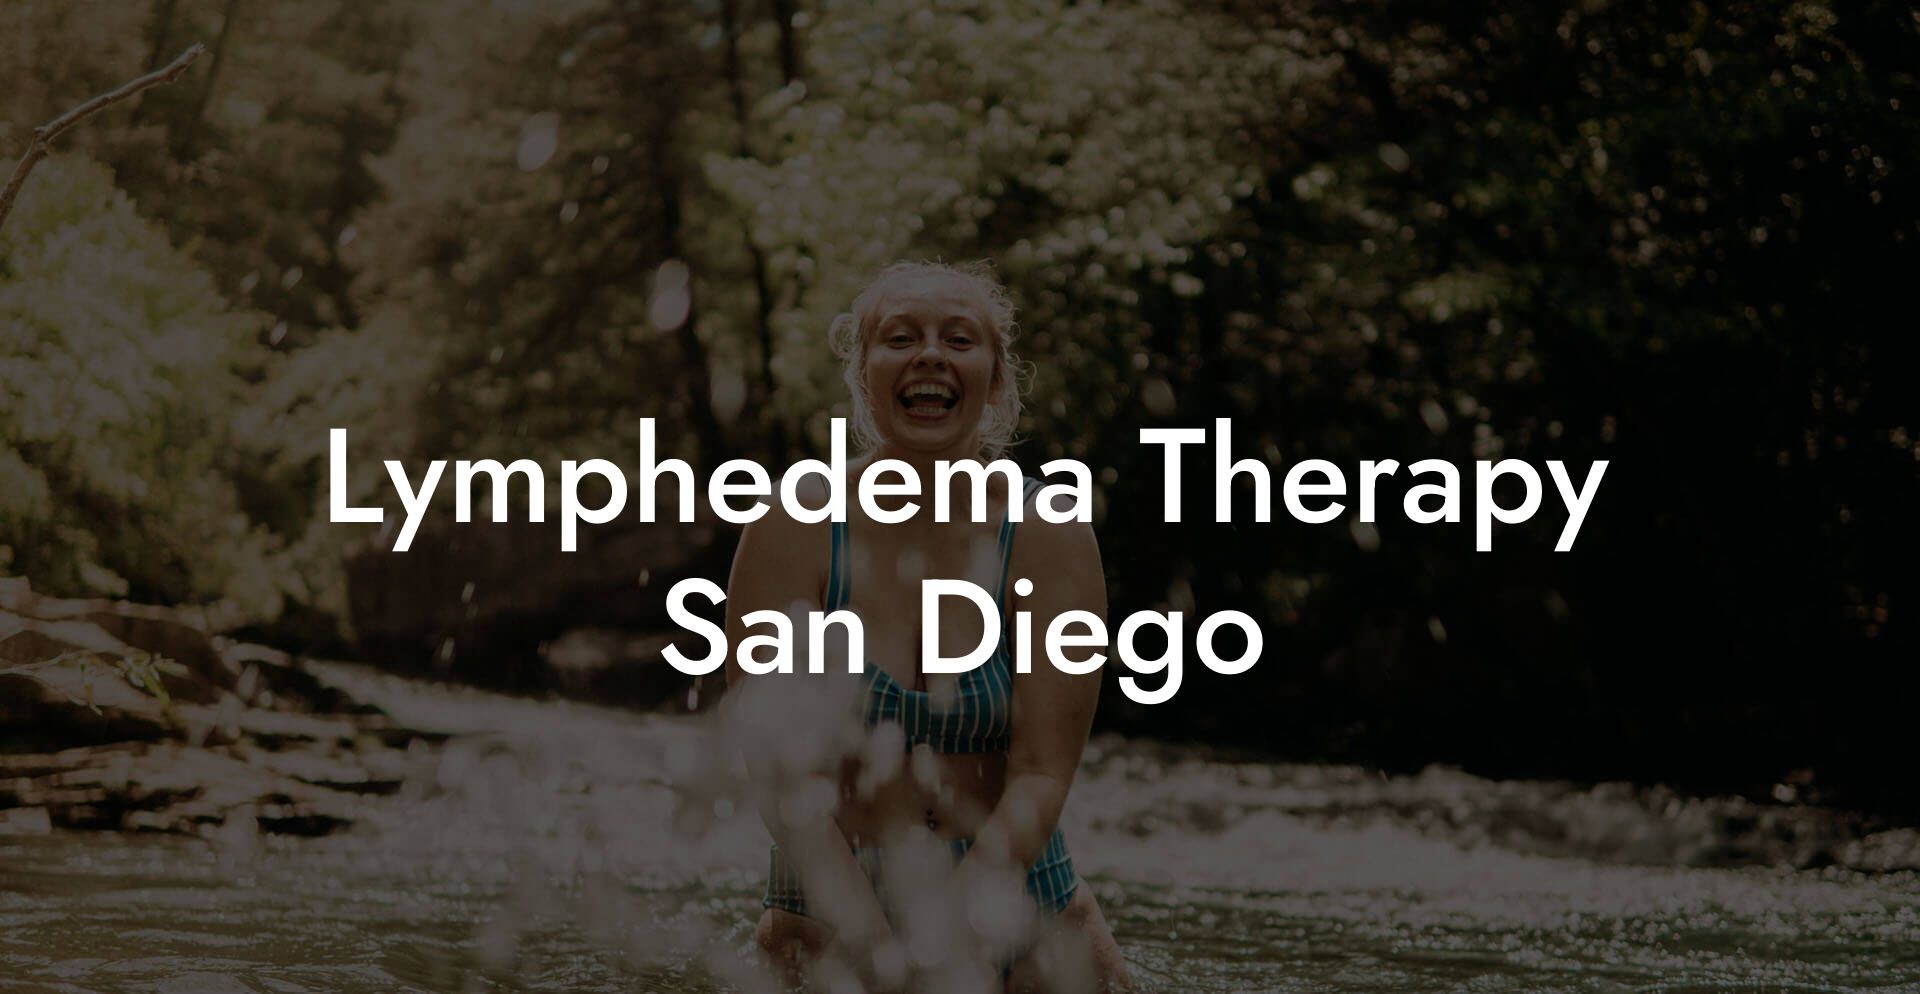 Lymphedema Therapy San Diego